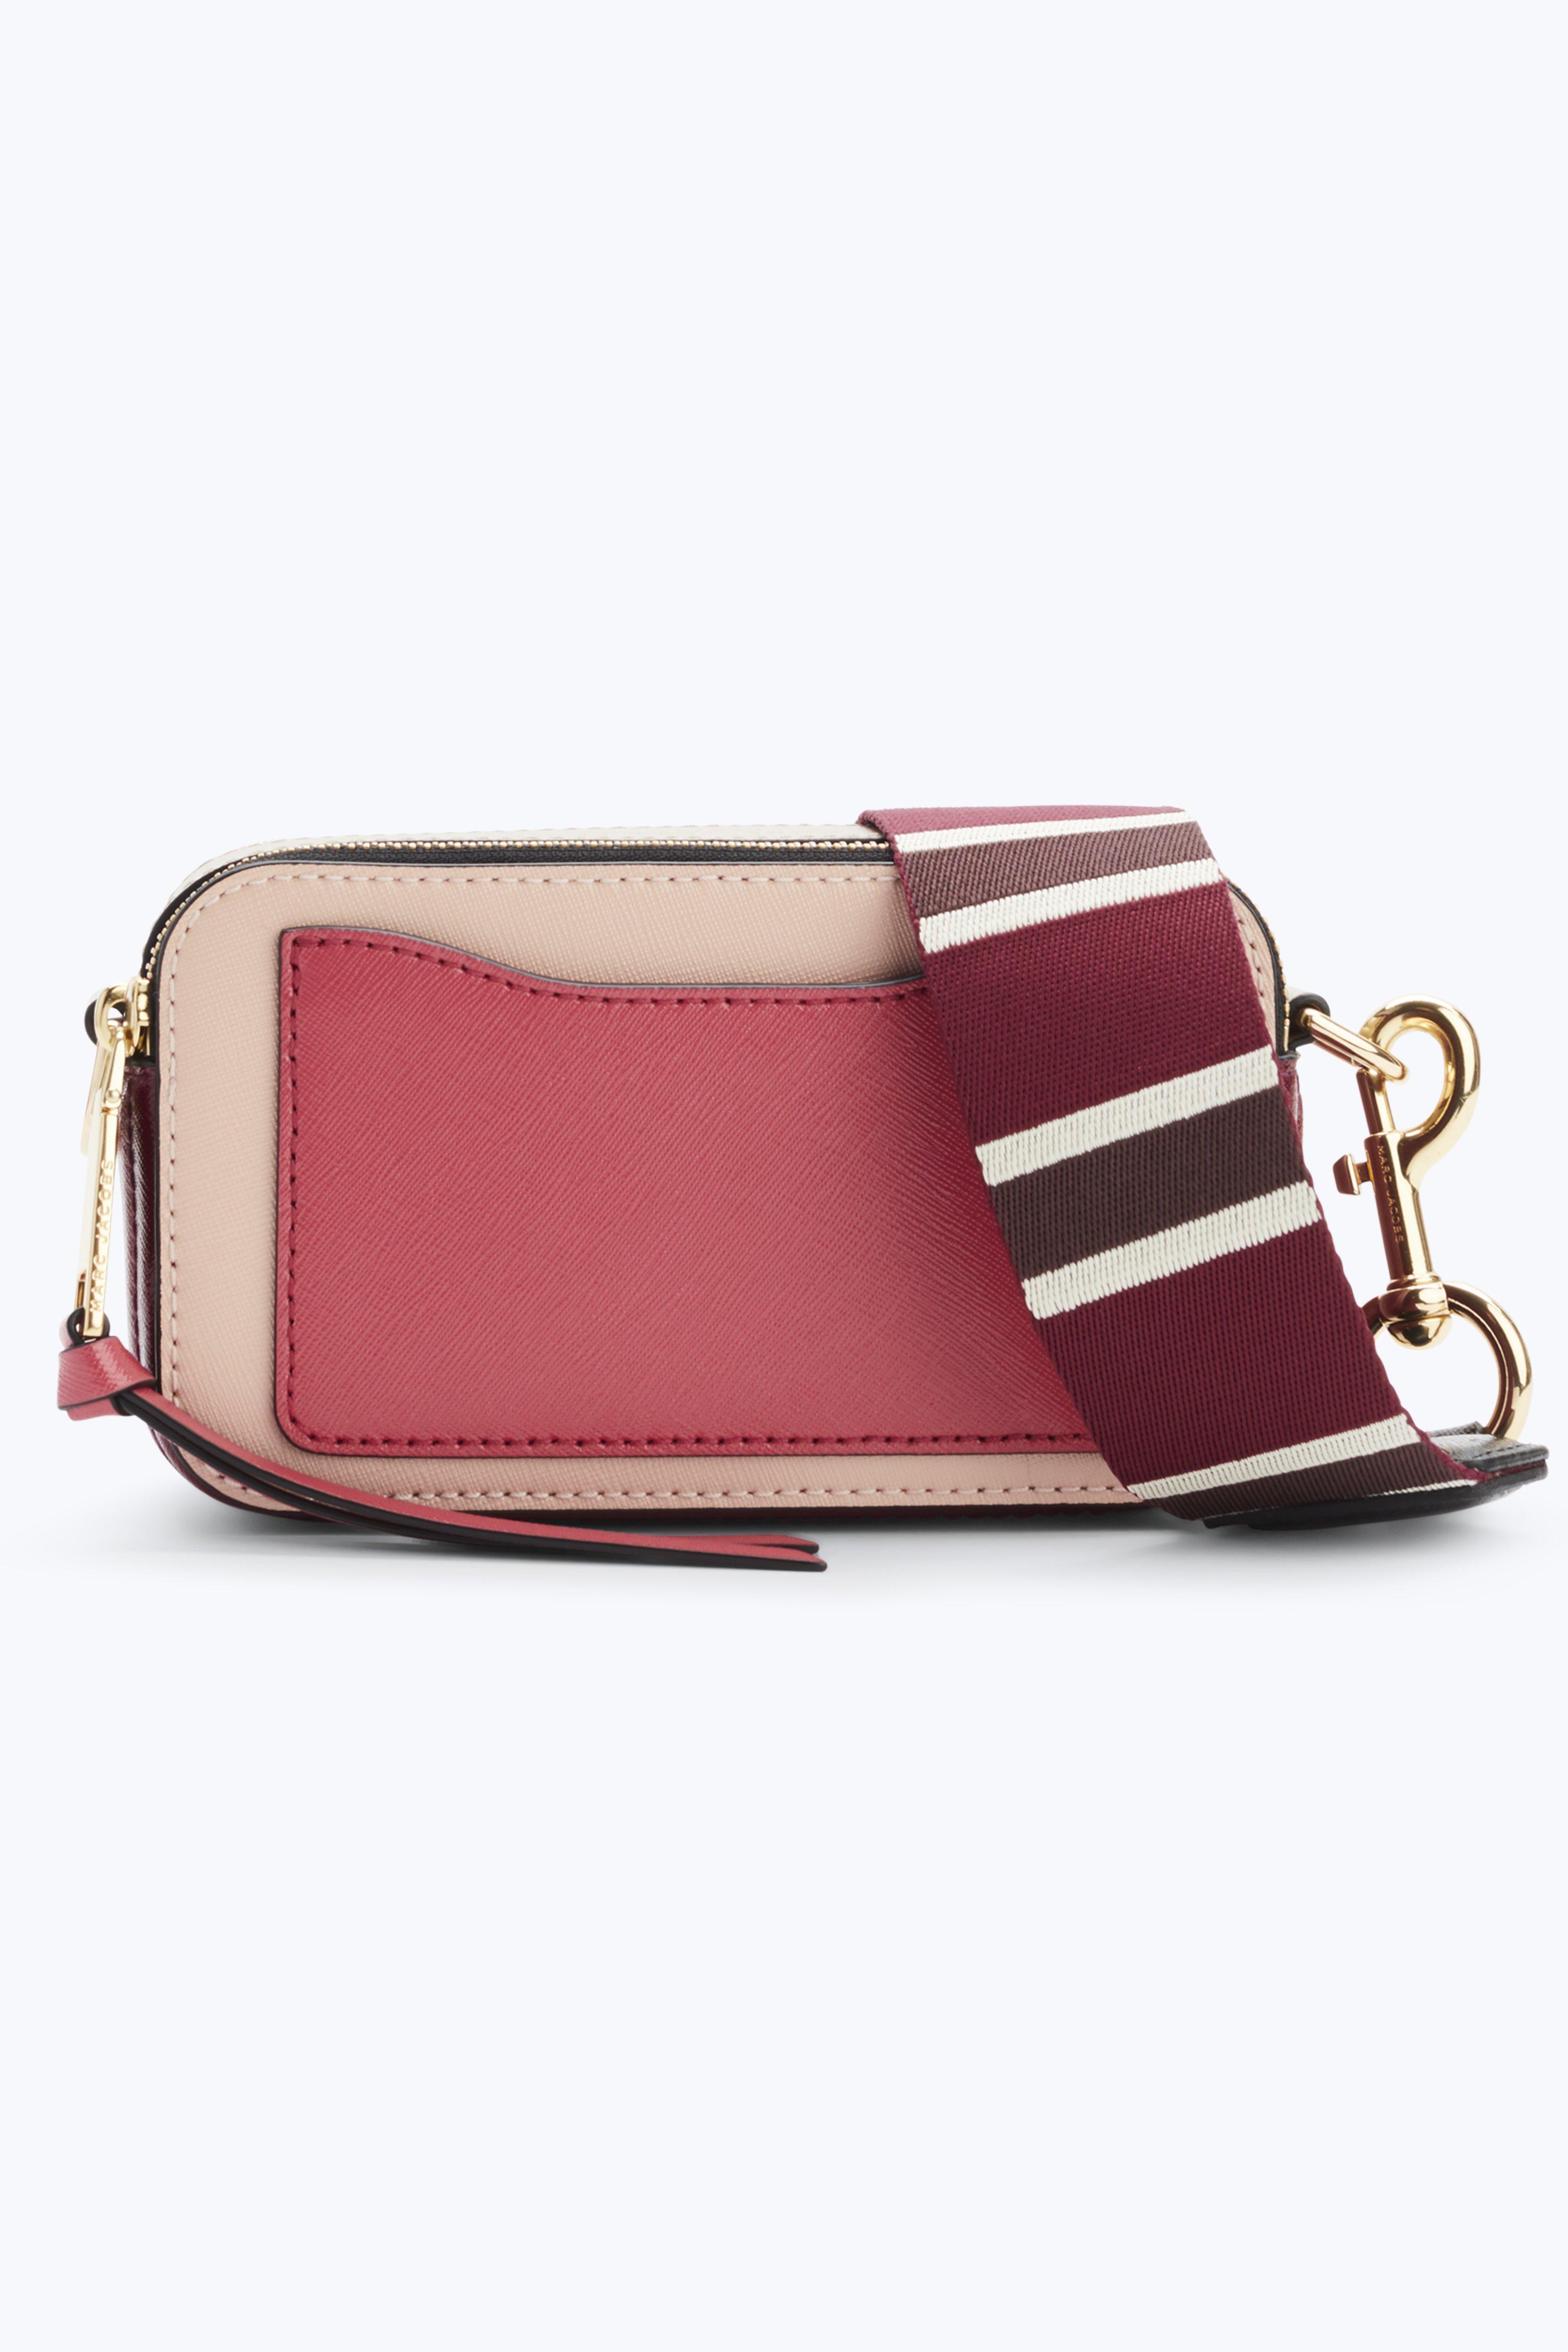 Marc Jacobs Snapshot Leather Camera Bag In Rose Multi ...